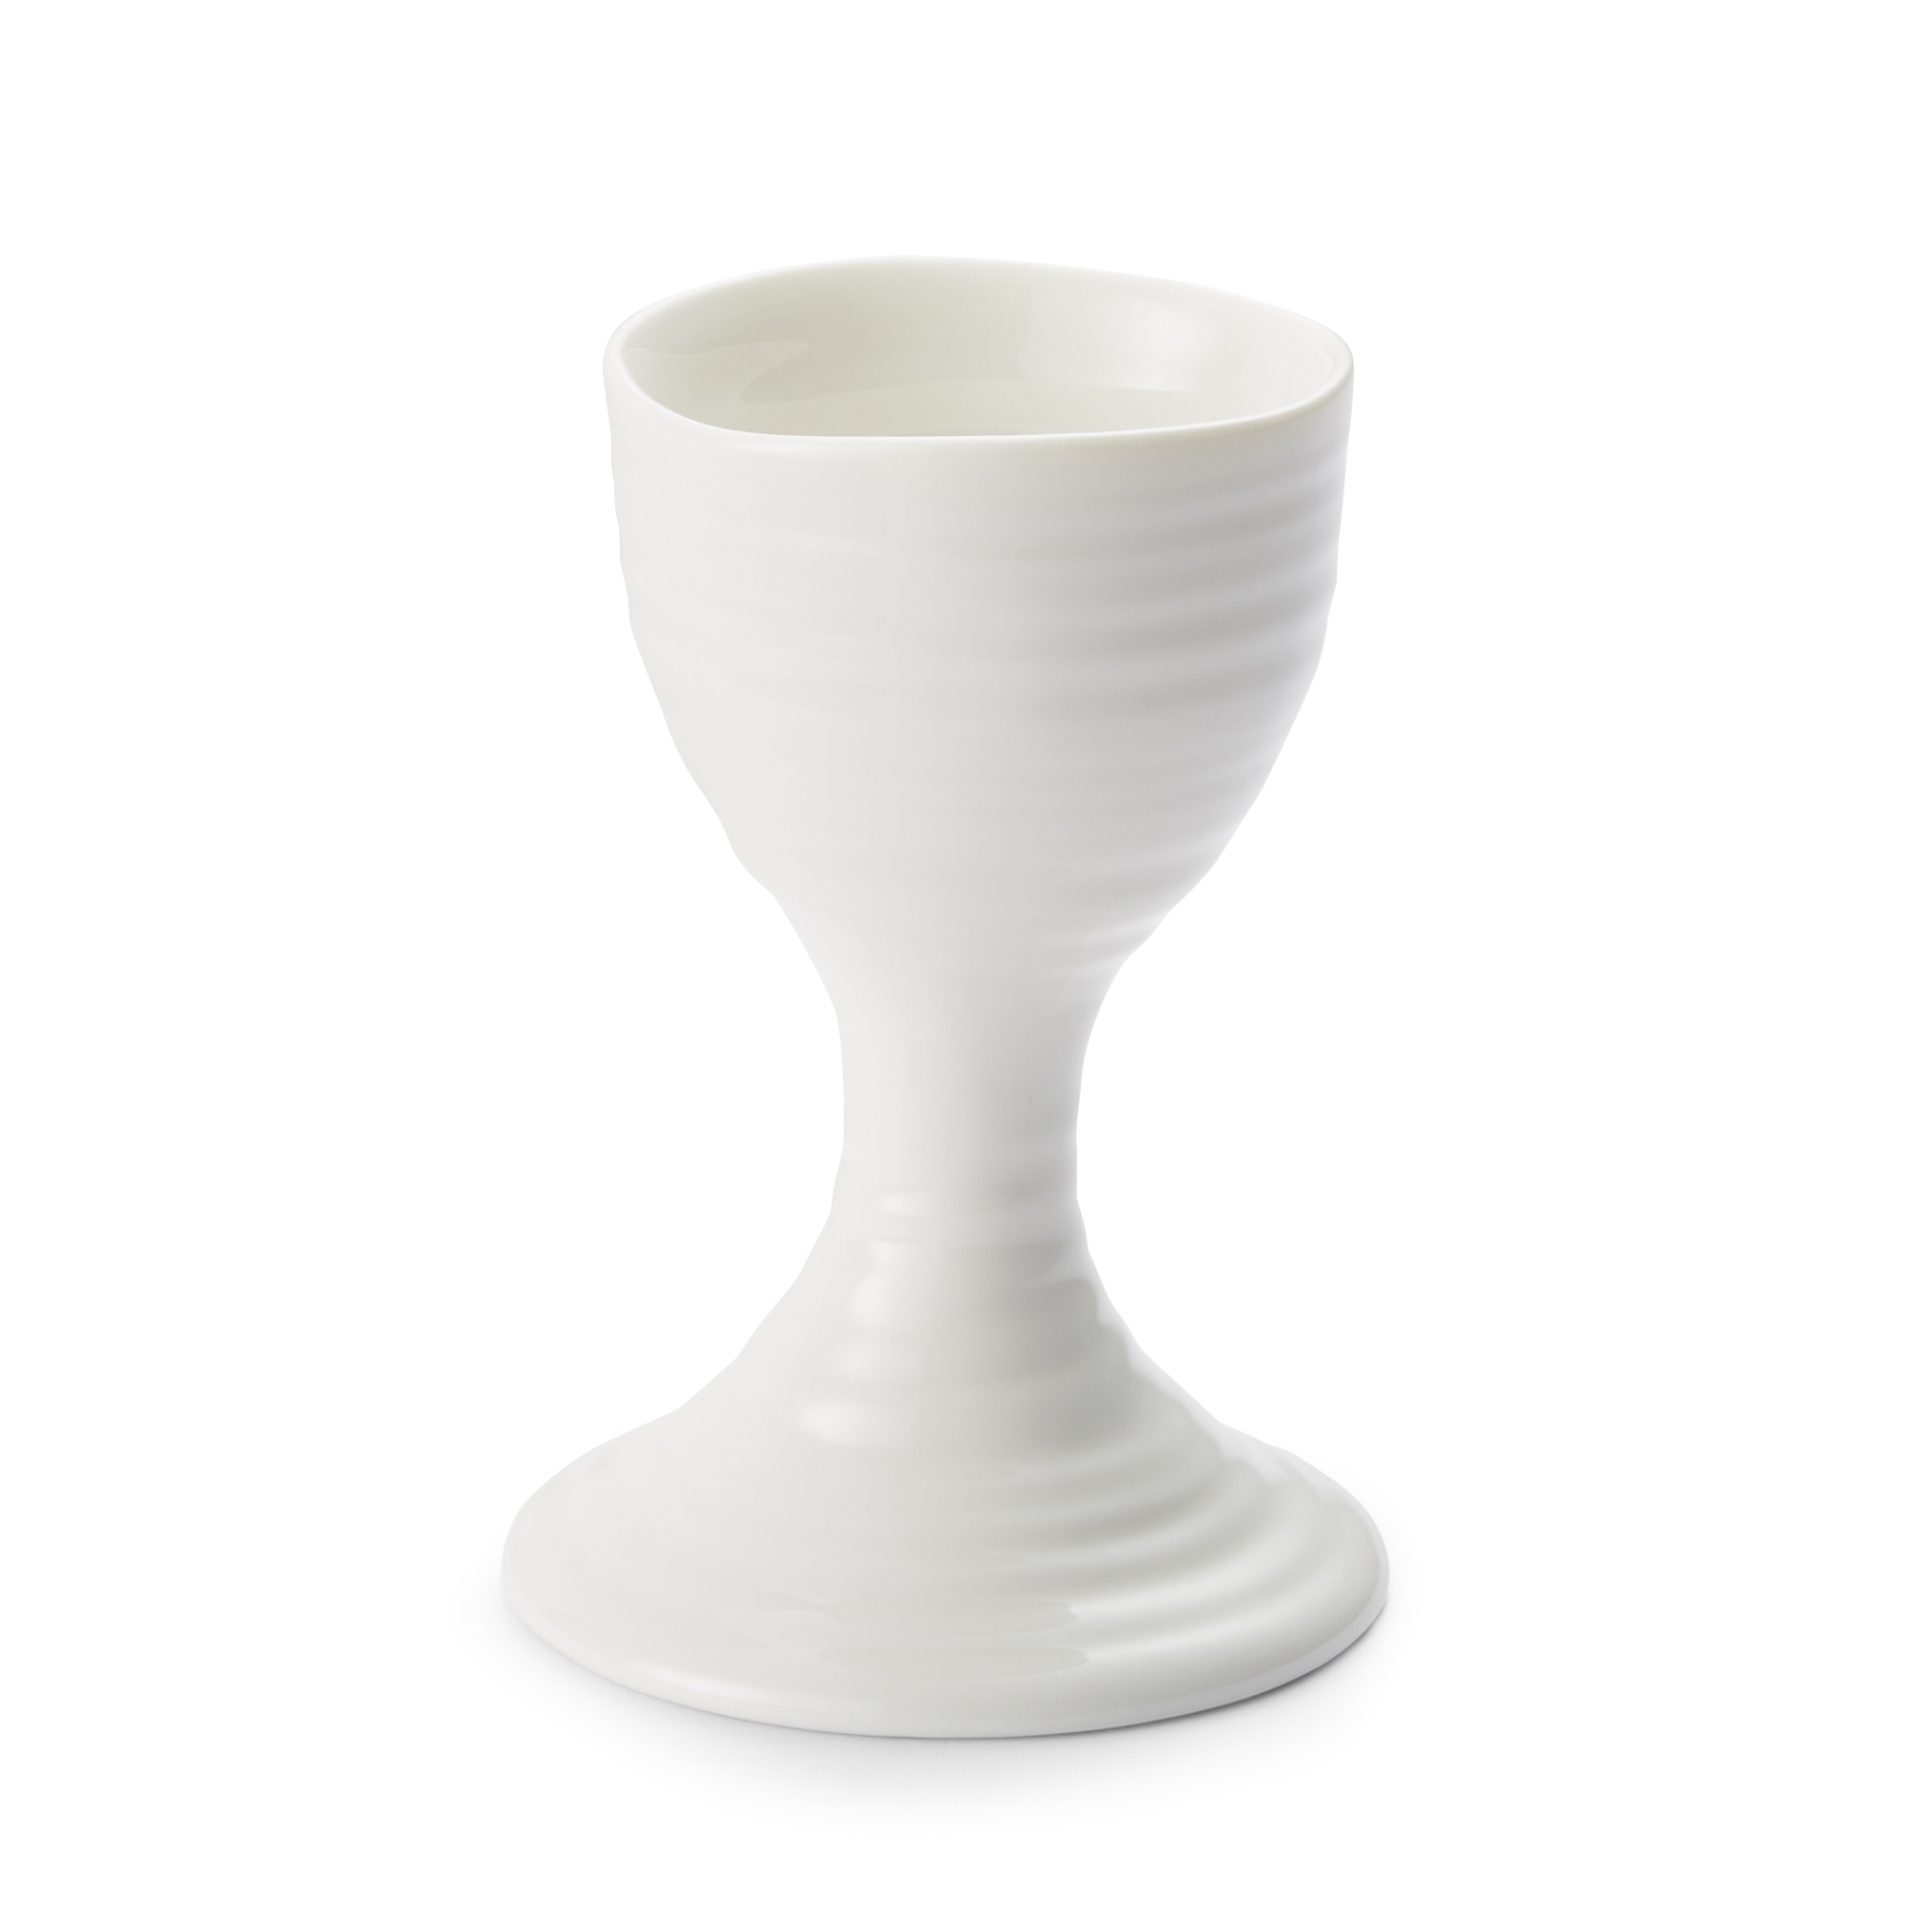 Sophie Conran Set of 2 Egg Cups, White image number null